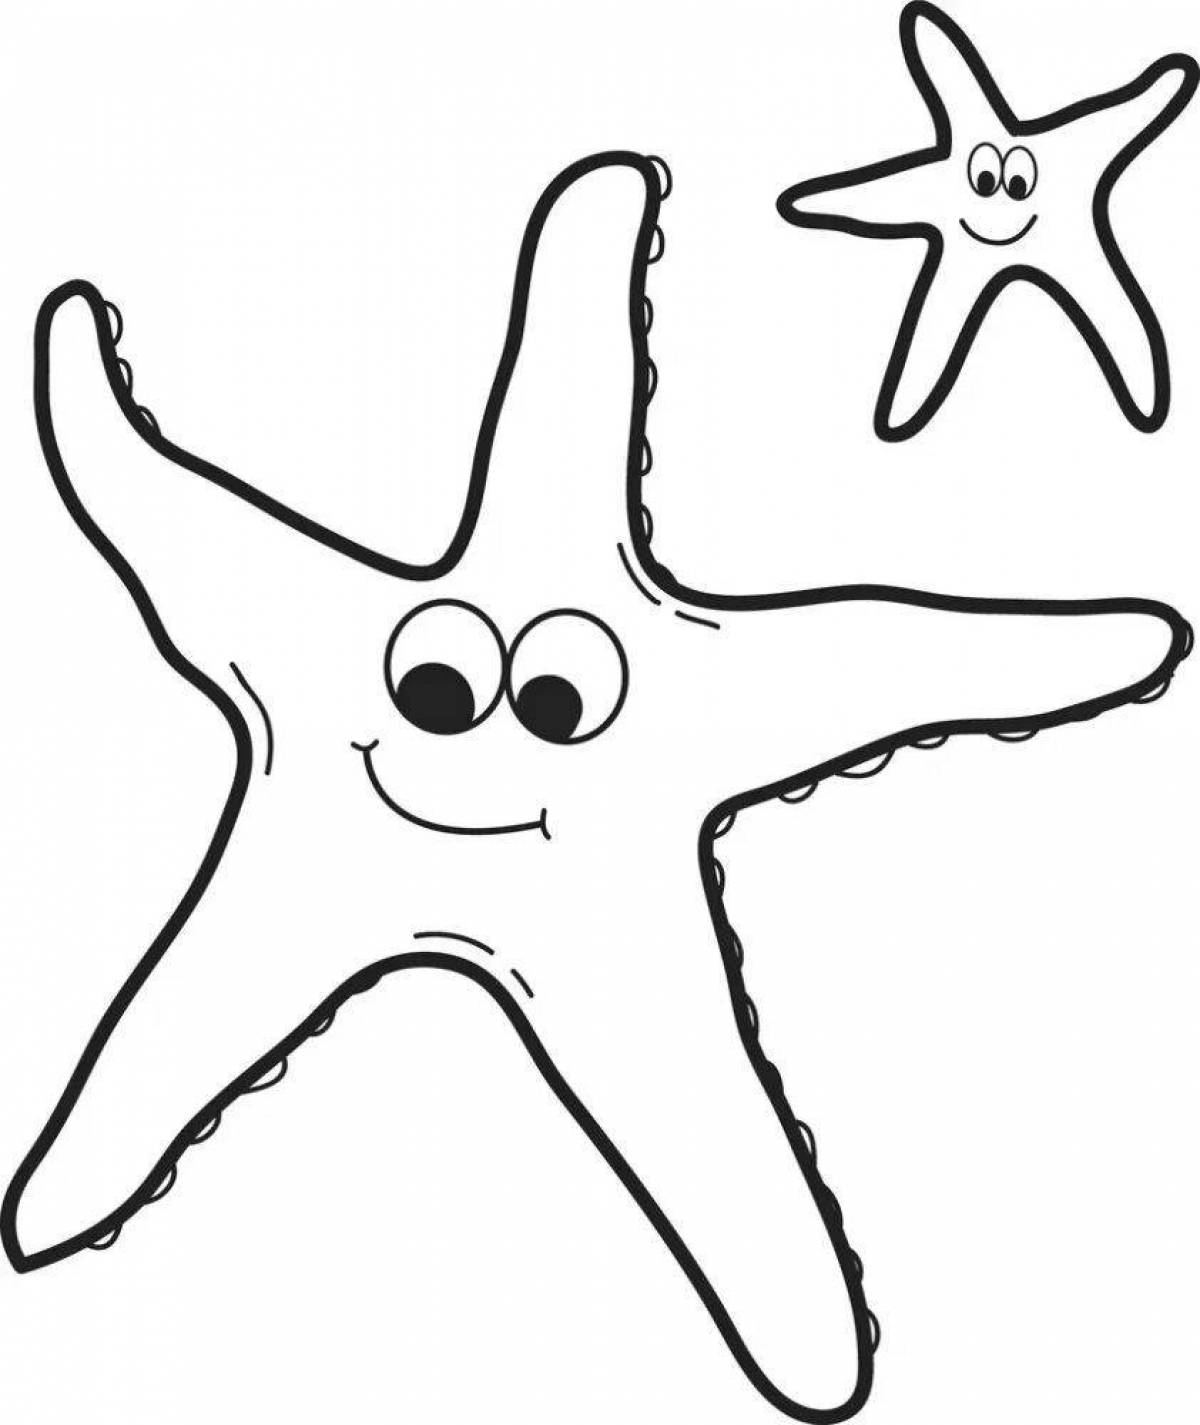 Marvelous starfish coloring pages for kids